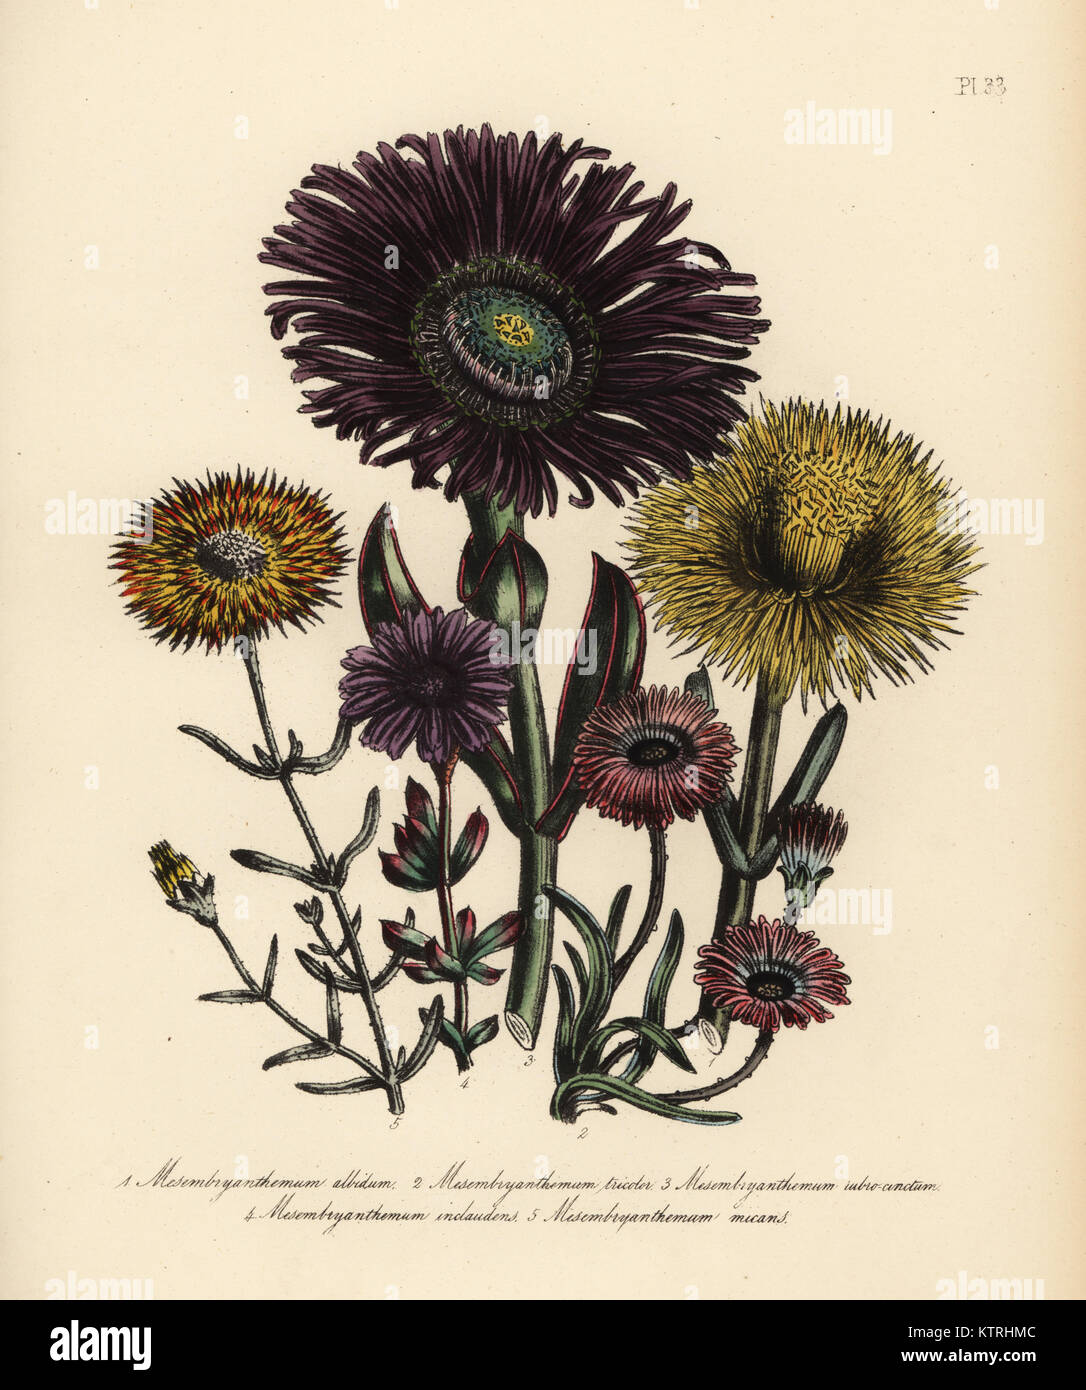 White-leaved fig marigold, Mesembryanthemum albidum, three-coloured, M. tricolor, red-edged, M. rubrocinctum, never-closing fig marigold, M. inclaudens, and glittering fig marigold, M. micans. Handfinished chromolithograph by Henry Noel Humphreys after an illustration by Jane Loudon from Mrs. Jane Loudon's Ladies Flower Garden or Ornamental Greenhouse Plants, William S. Orr, London, 1849. Stock Photo